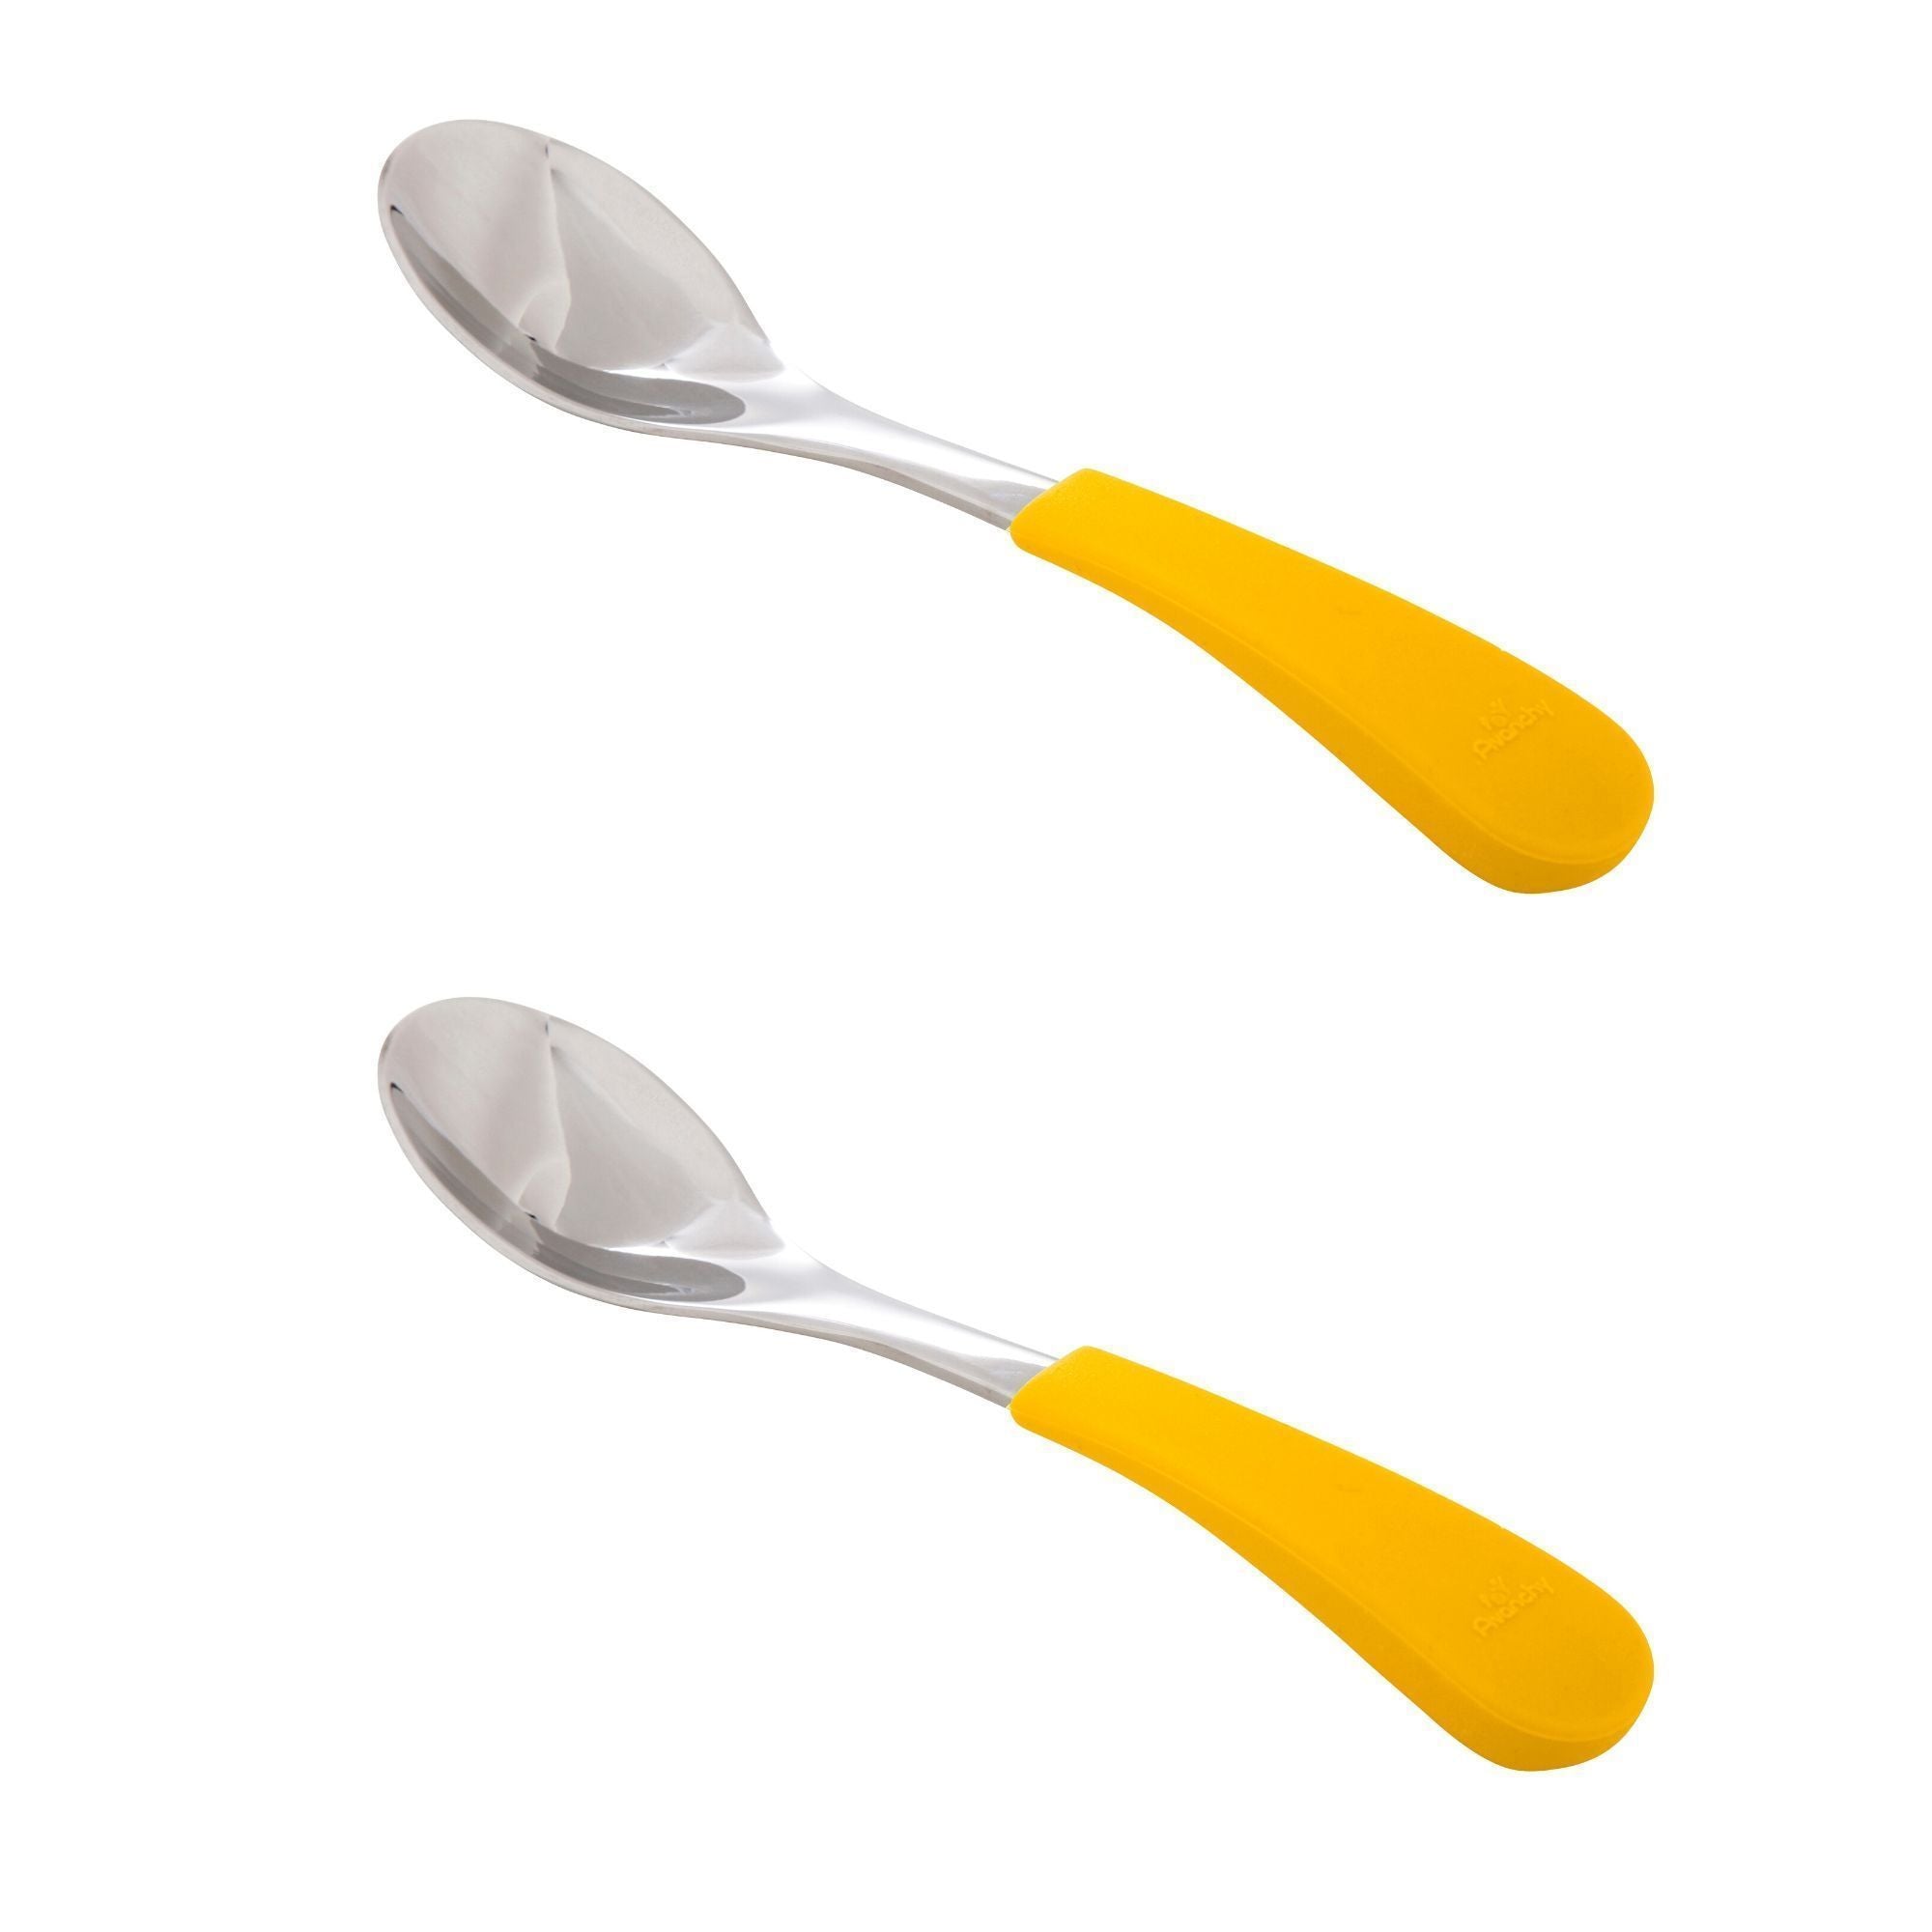 https://littleandloved.co.nz/cdn/shop/products/avanchy-stainless-steel-baby-spoons-2-pack-older-babies-baby-feeding-avanchy-sustainable-baby-dishware-yellow-36_2000x_87aa5939-0b46-490d-886b-569dd1009597.jpg?v=1594271722&width=2000